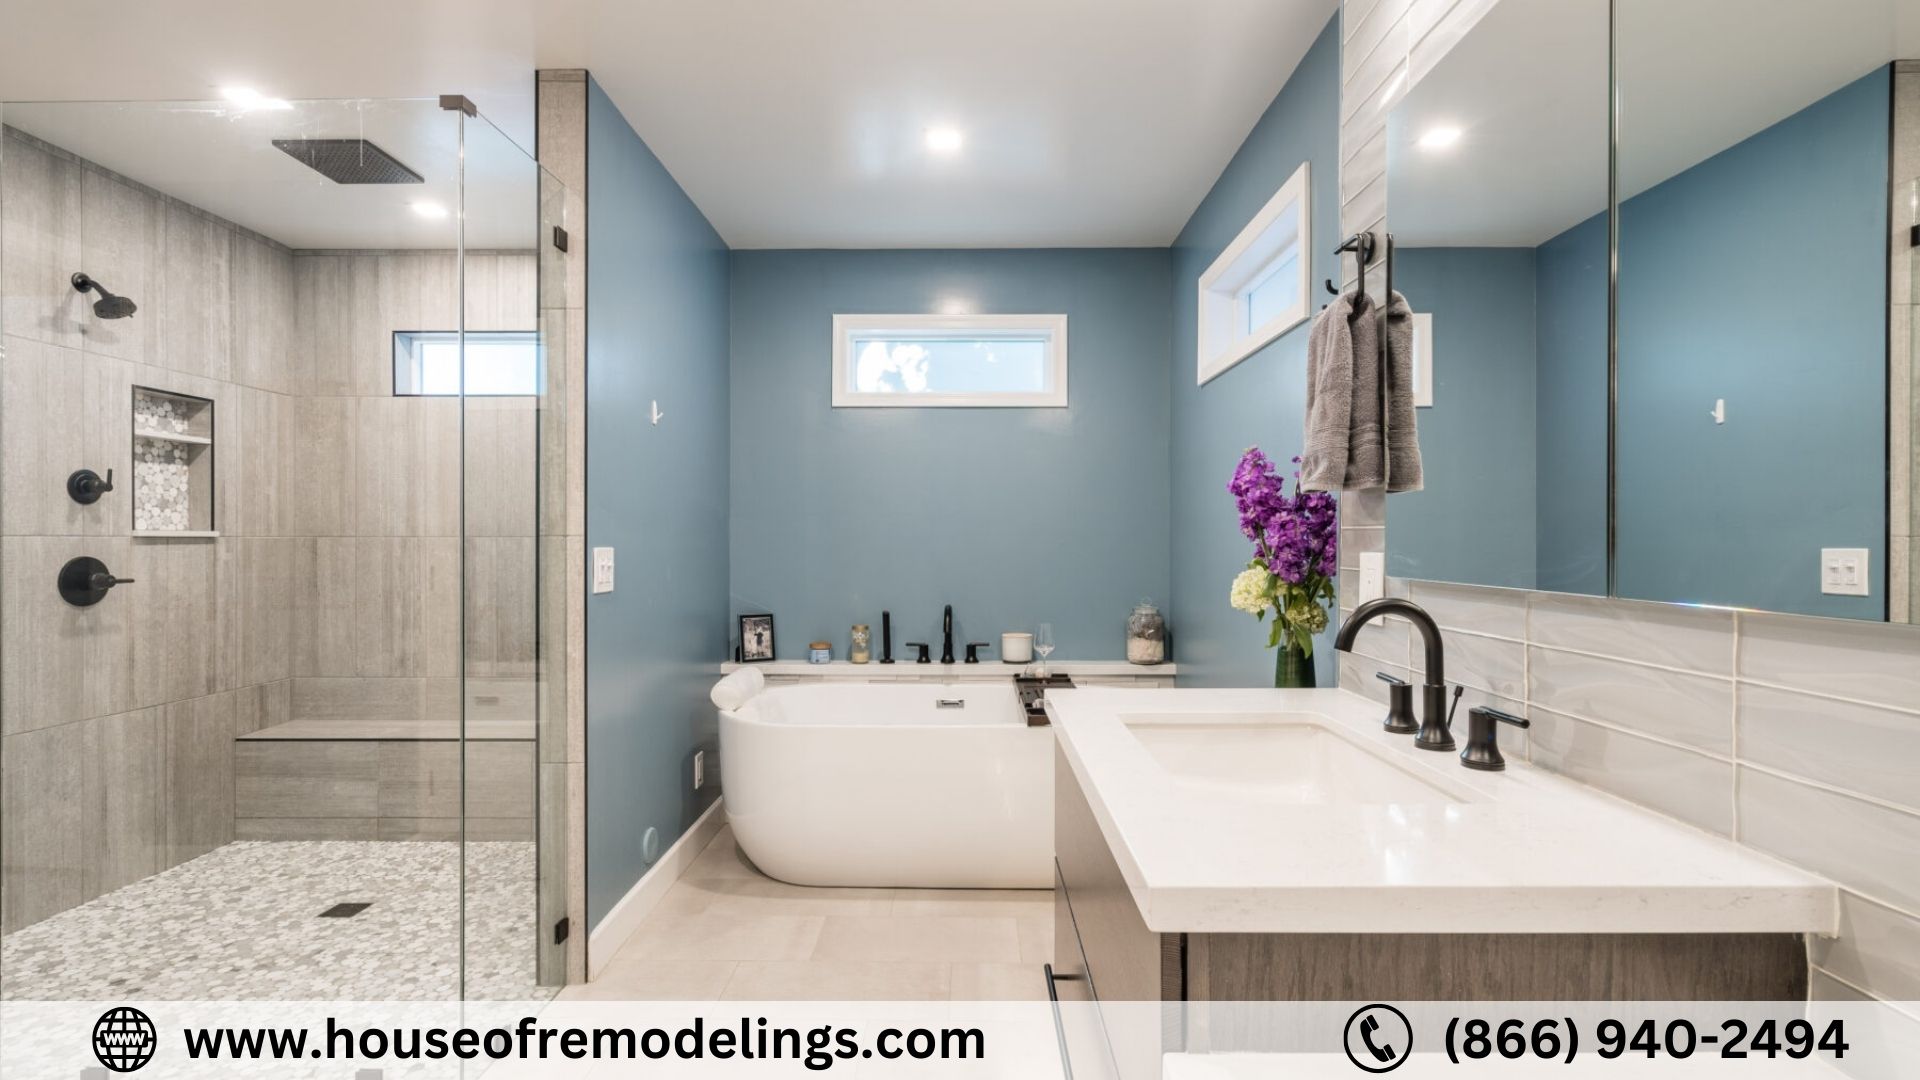 Elevate Your Home with Expert Bathroom Remodeling Services in Lake Forest, CA – Transform Your Home with Expert Home Remodeling Services in Lake Forest